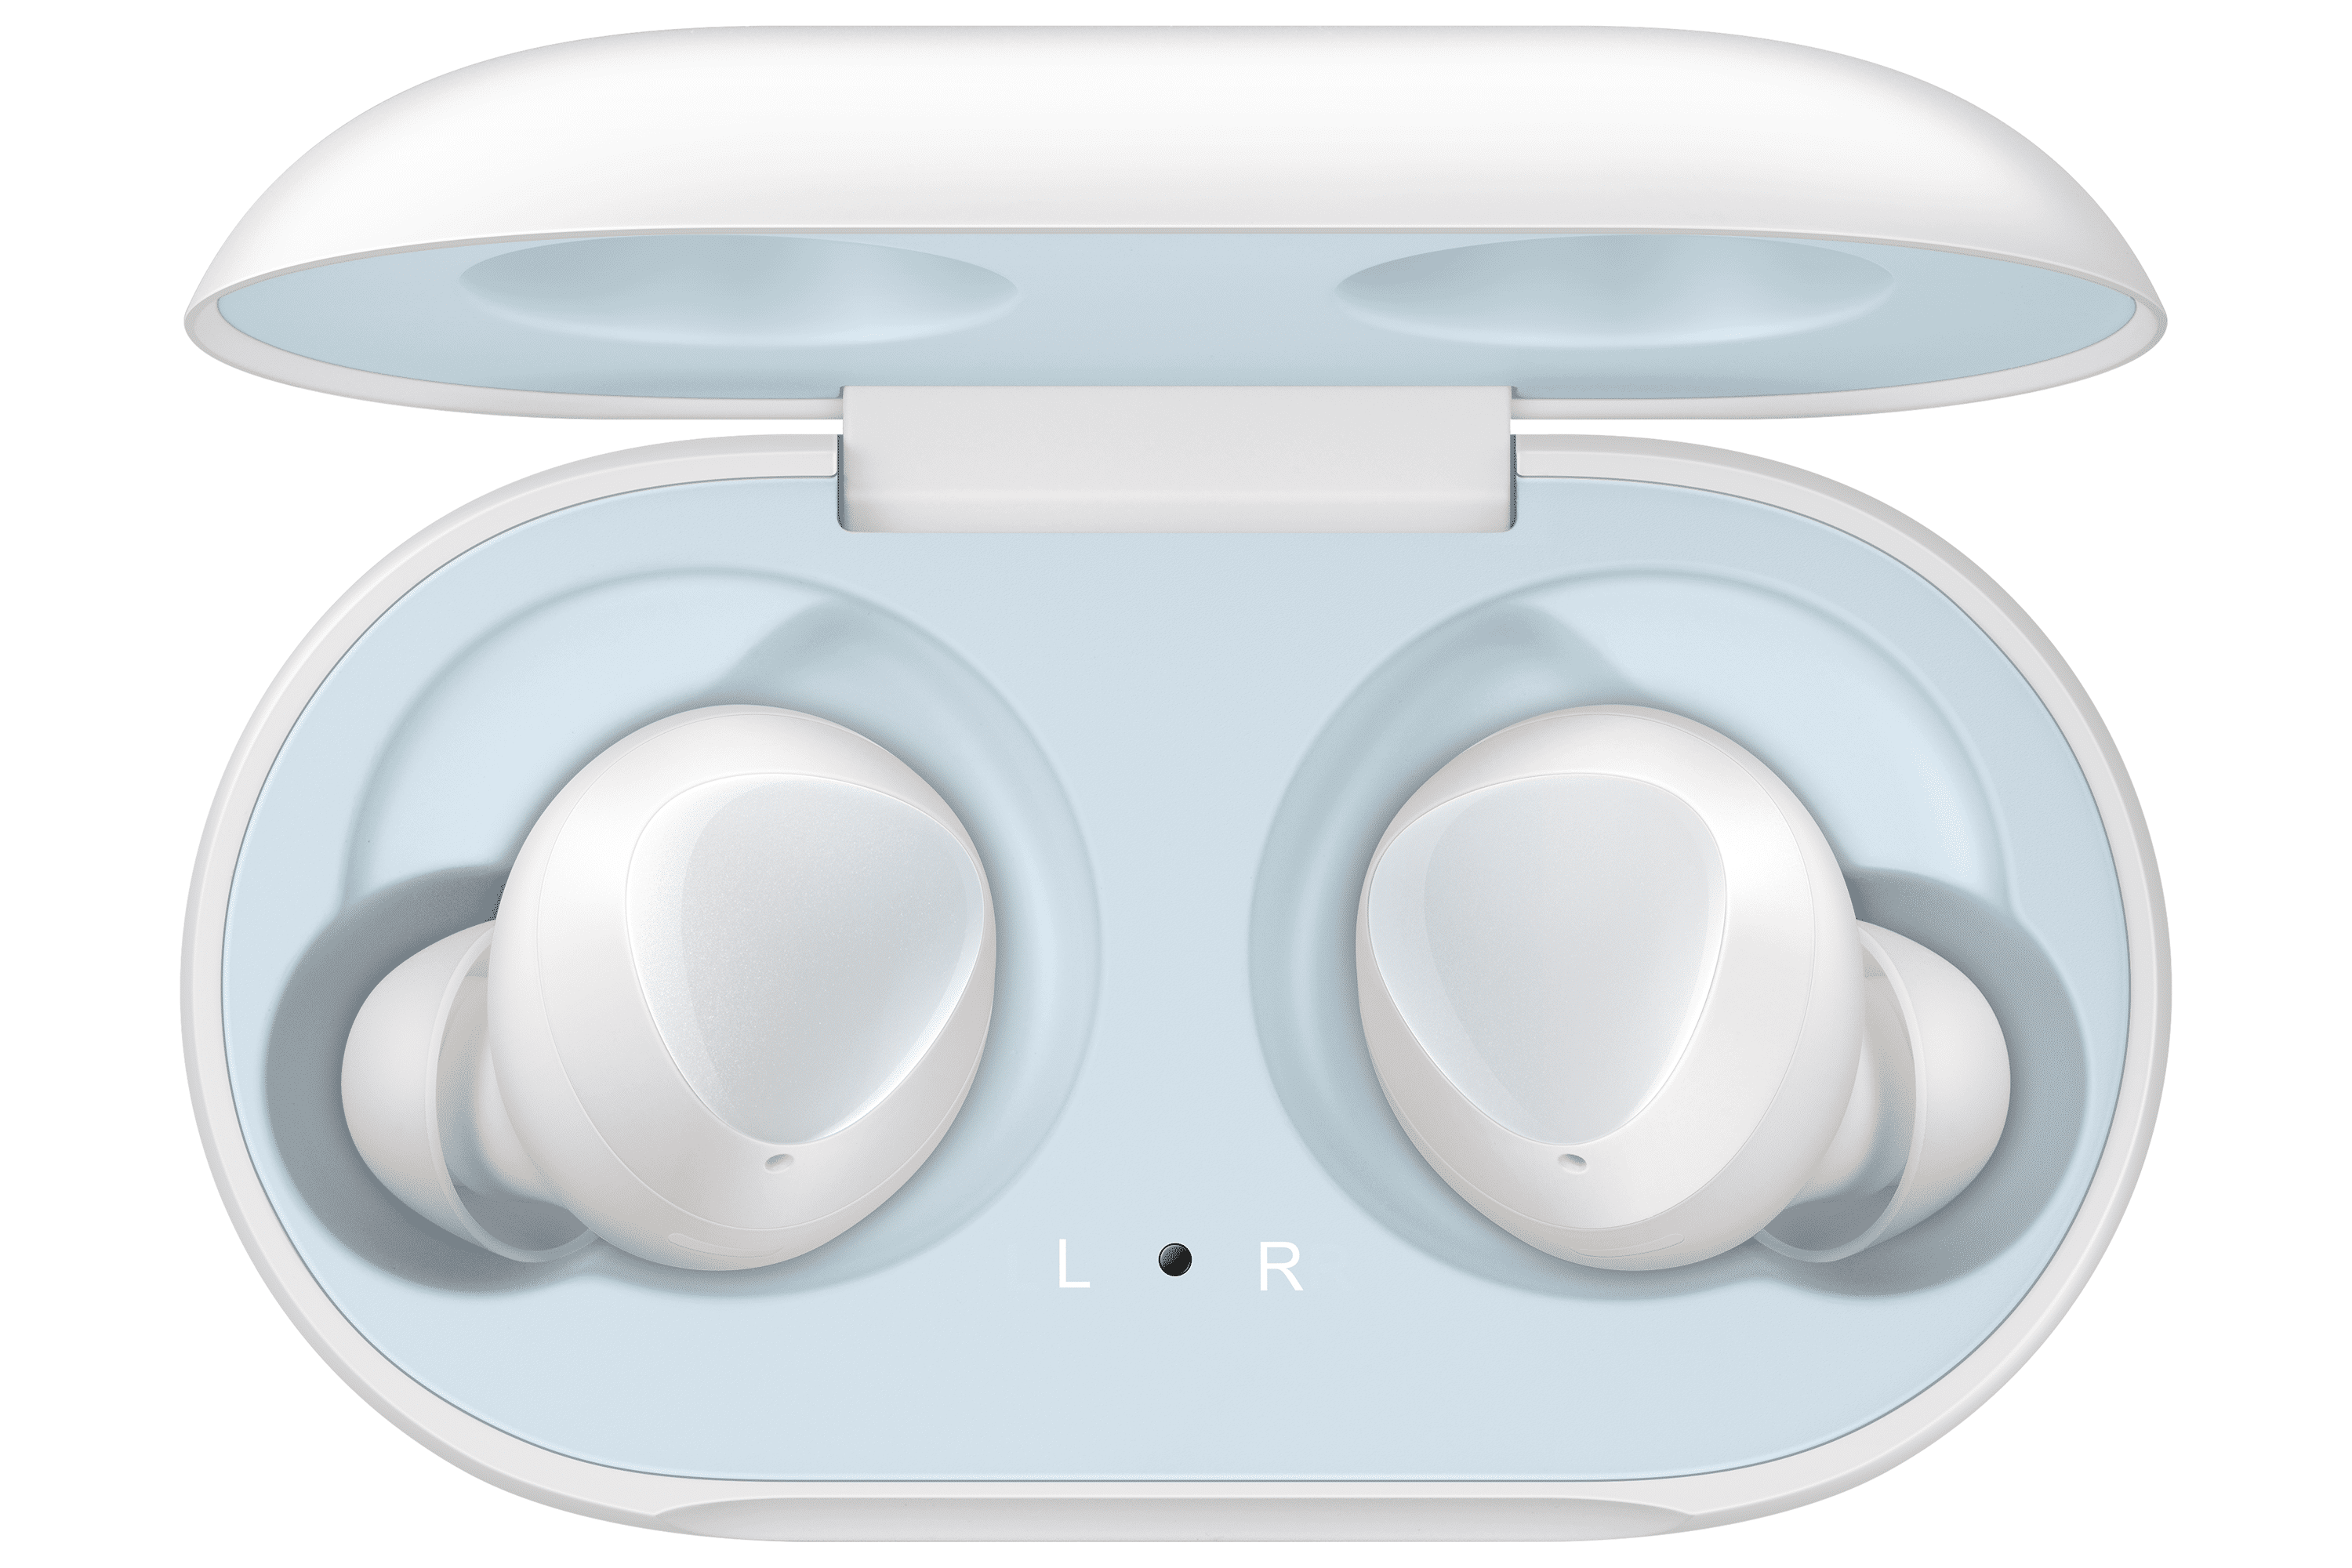 SAMSUNG Galaxy Buds, White (Charging Case Included) - Walmart.com